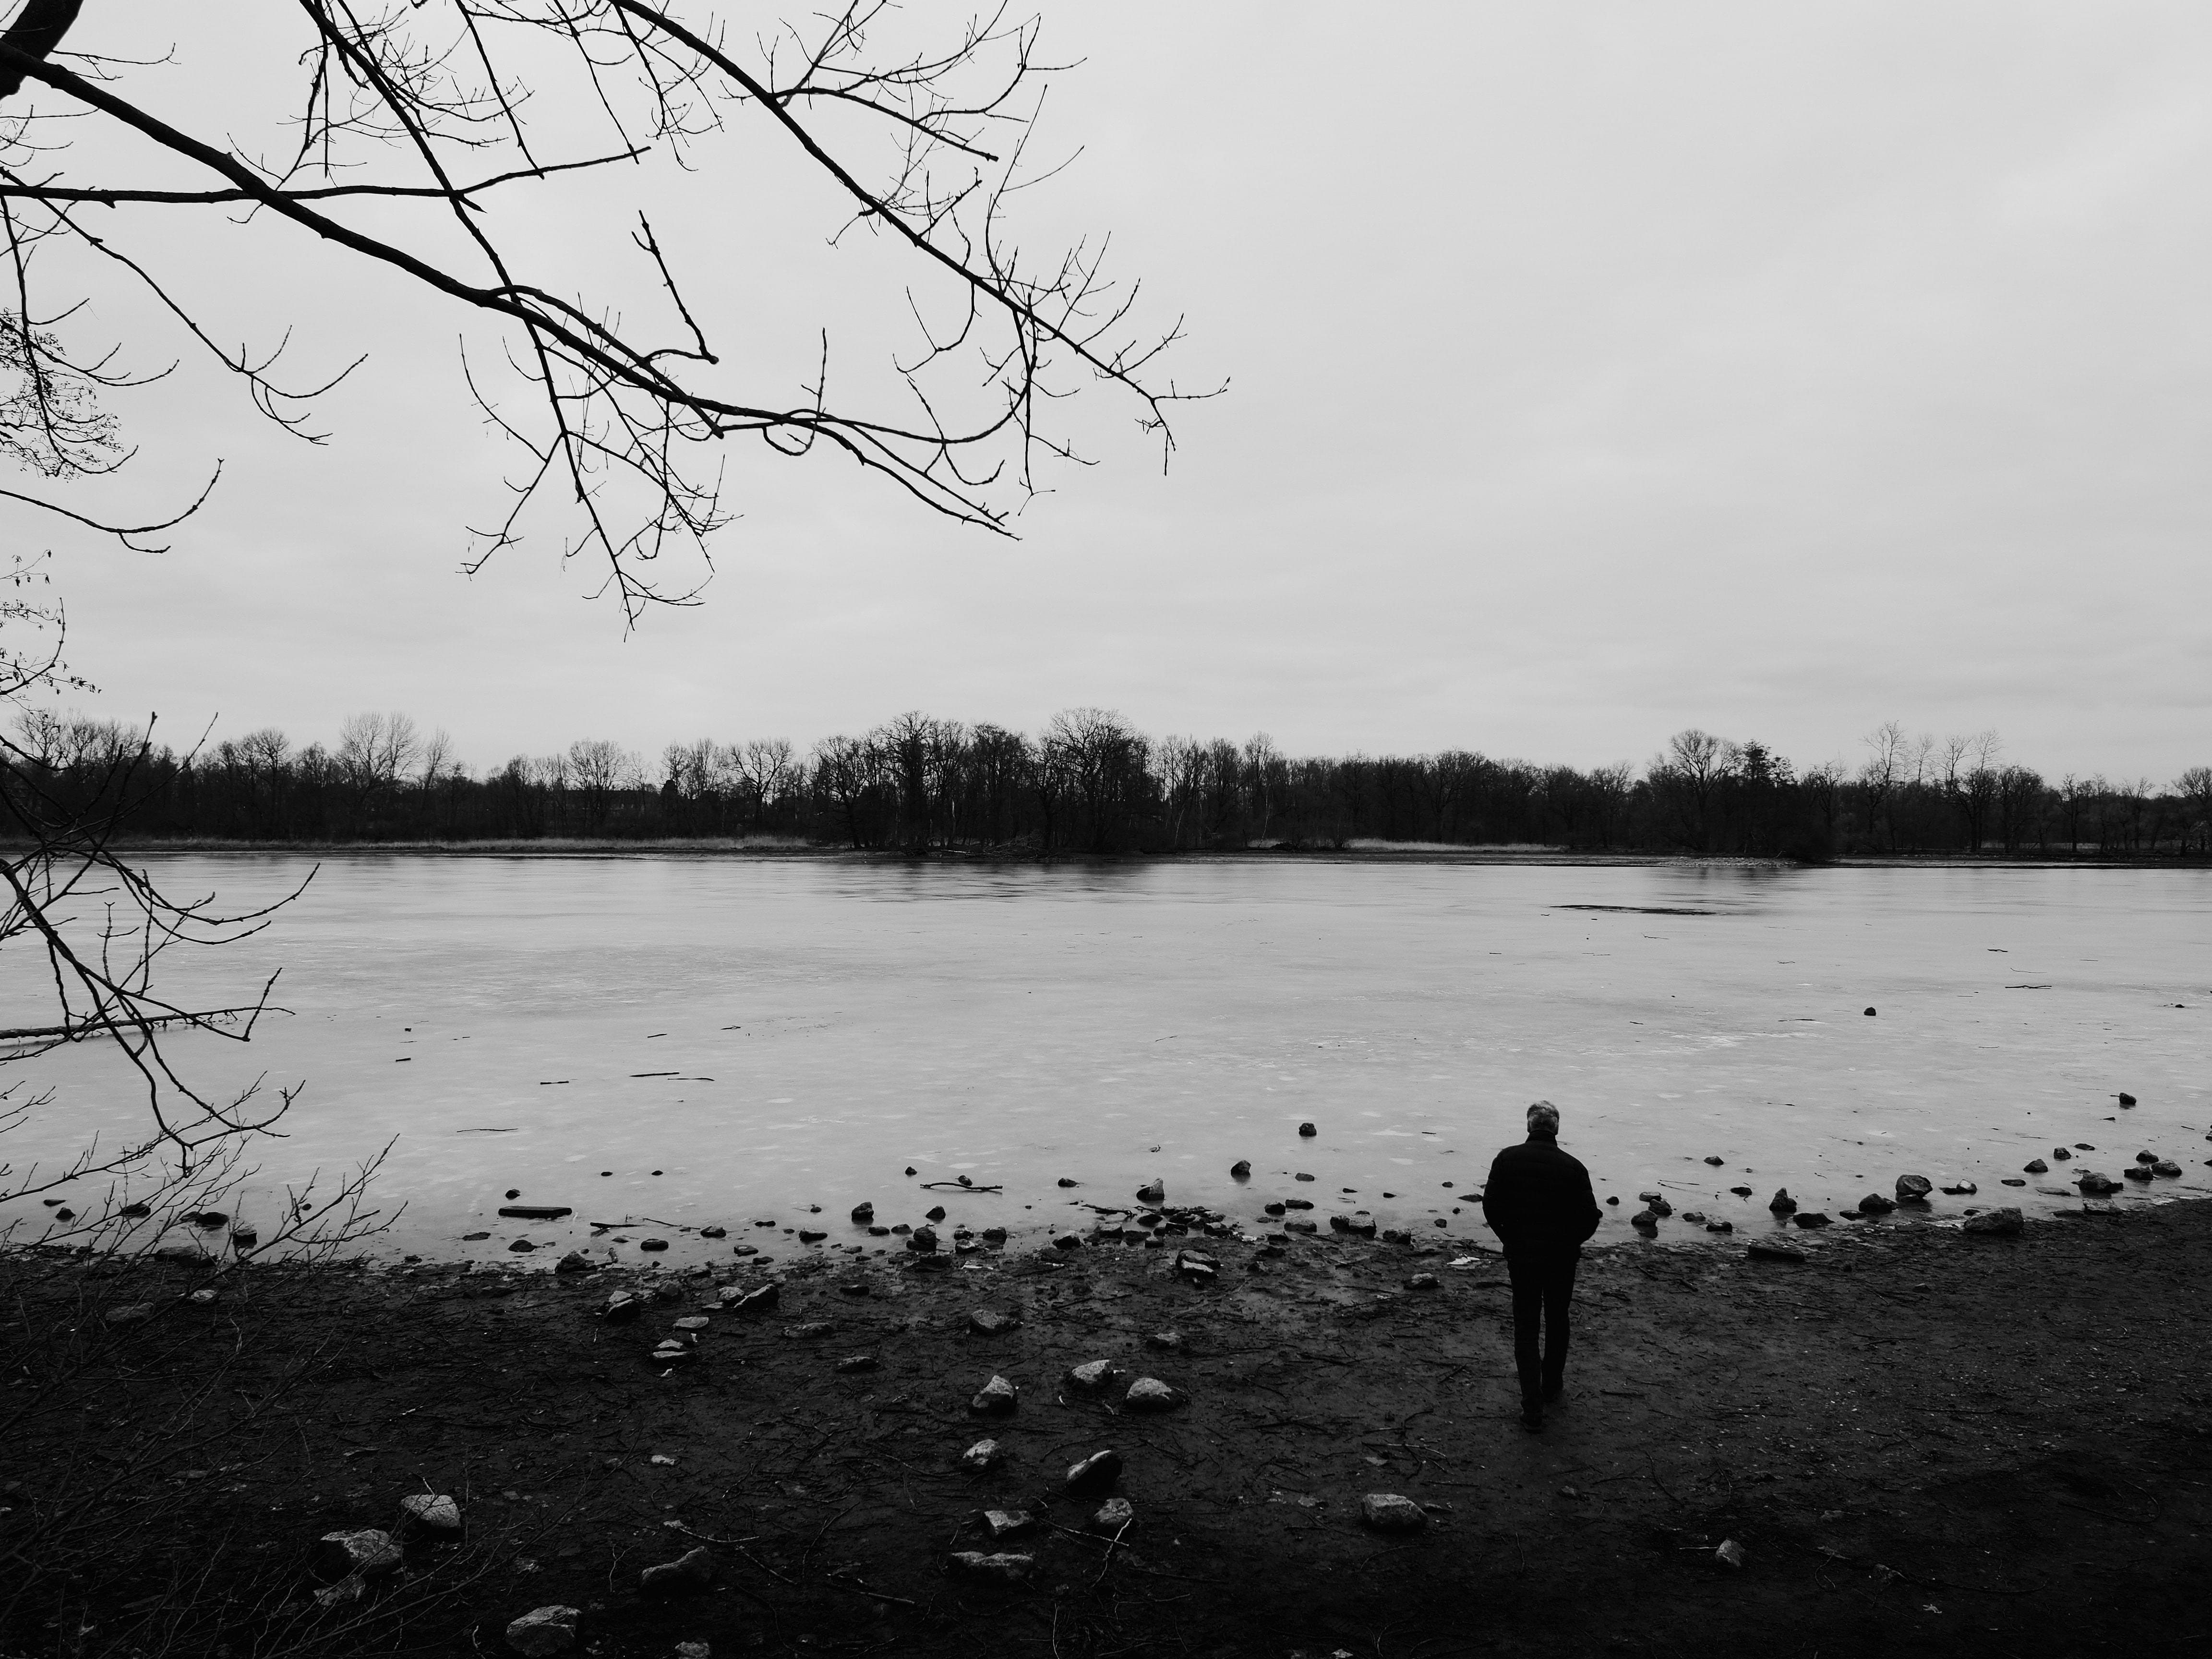 The back of a man overlooking an almost frozen pond in black and white